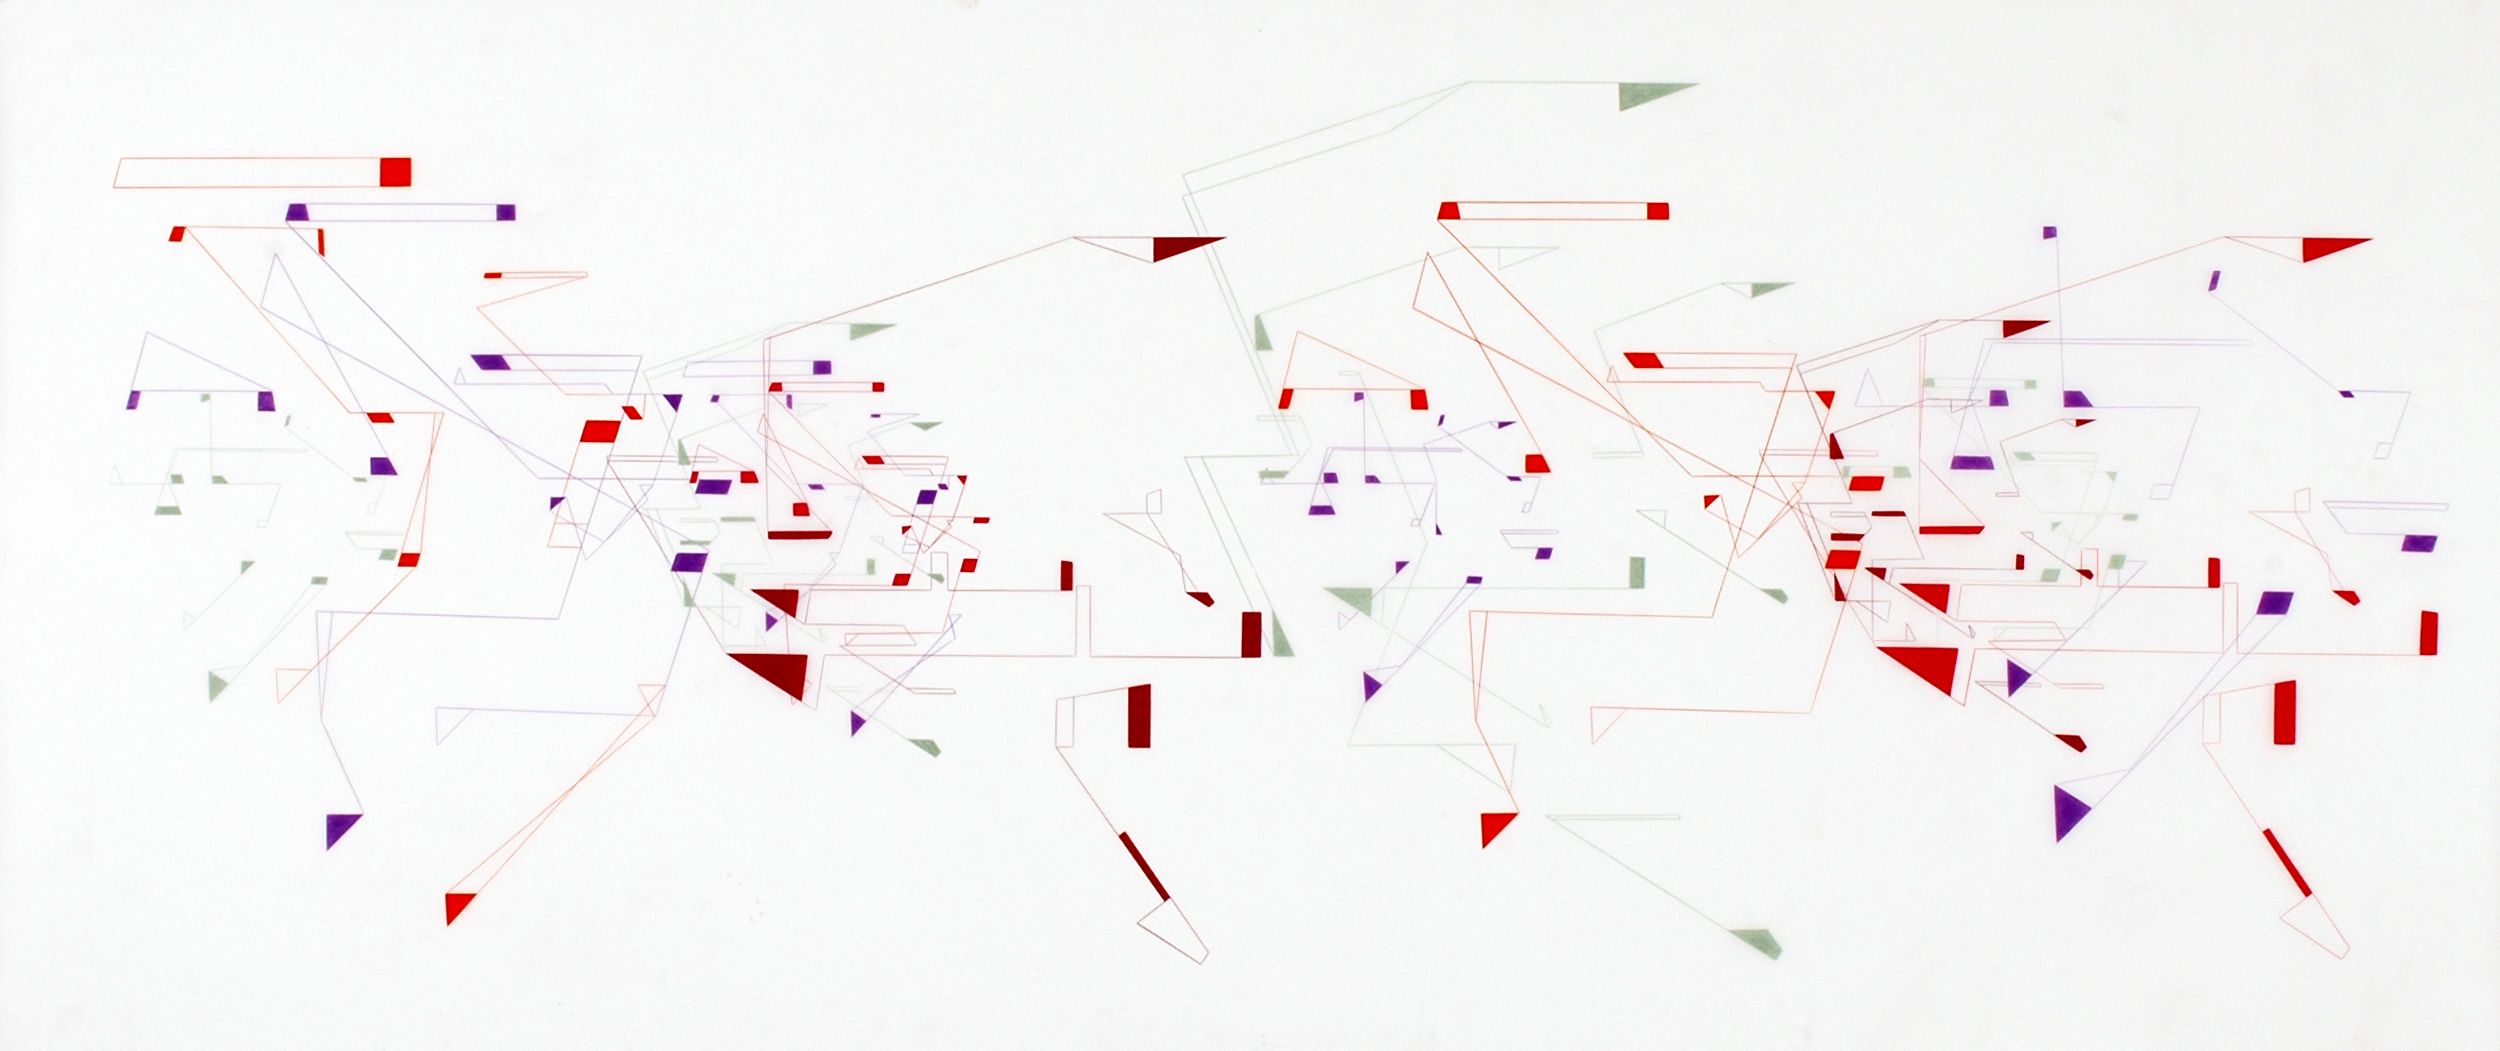 Spectral Variant #1 8.5
Colored Pencil on Mylar
42 x 92 inches, 2008